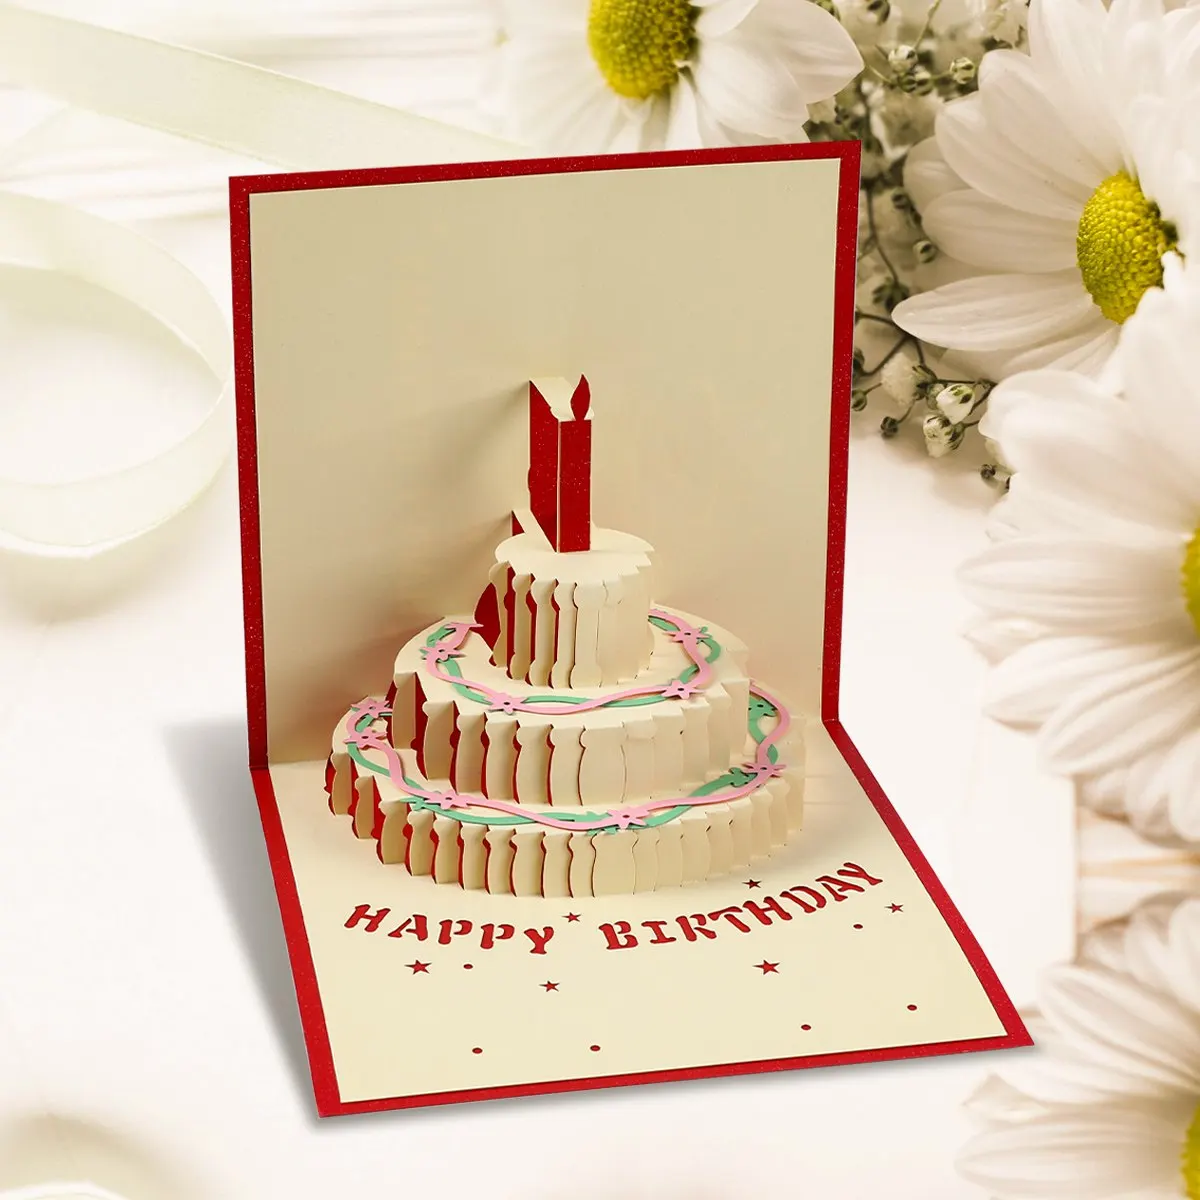 

3D Pop UP Birthday Card Slogan Graphic Cake Design 3D Greeting Card Happy Birthday Invitations Postcards Gifts Baby Shower